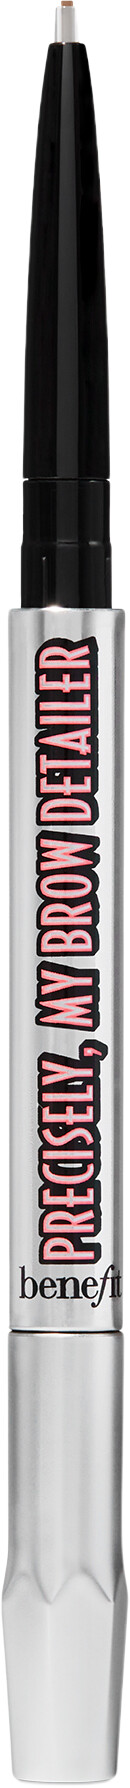 Benefit Precisely, My Brow Detailer Microfine Detailing Brow Pencil 0.02g 3 - Warm Light Brown